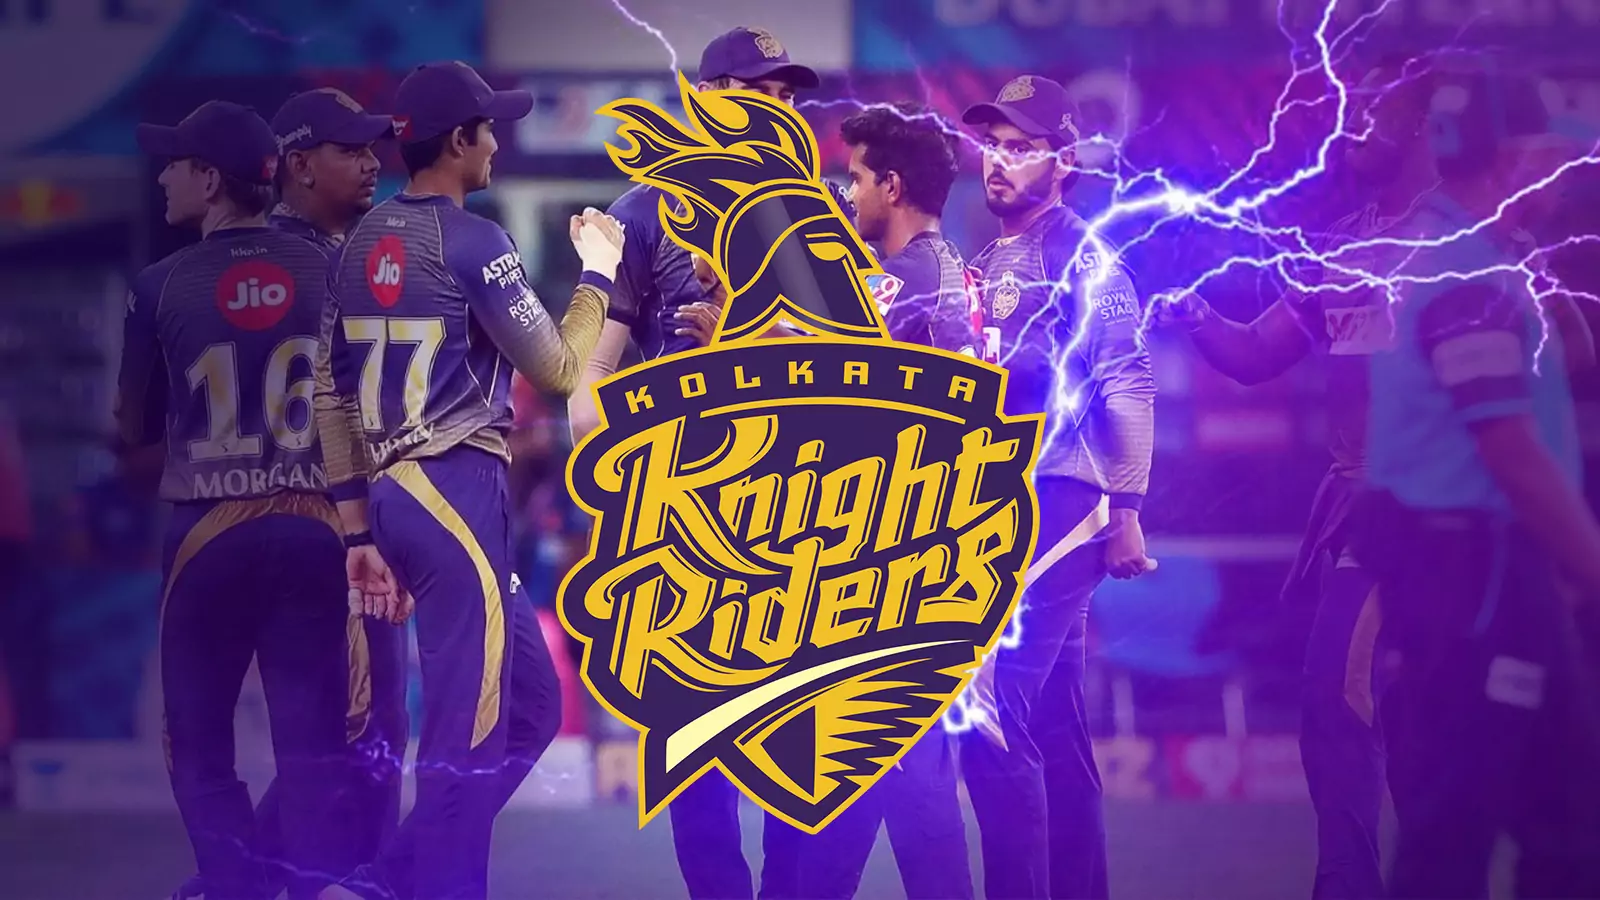 Join the IPL events and place bets on Kolkata Knight Riders.